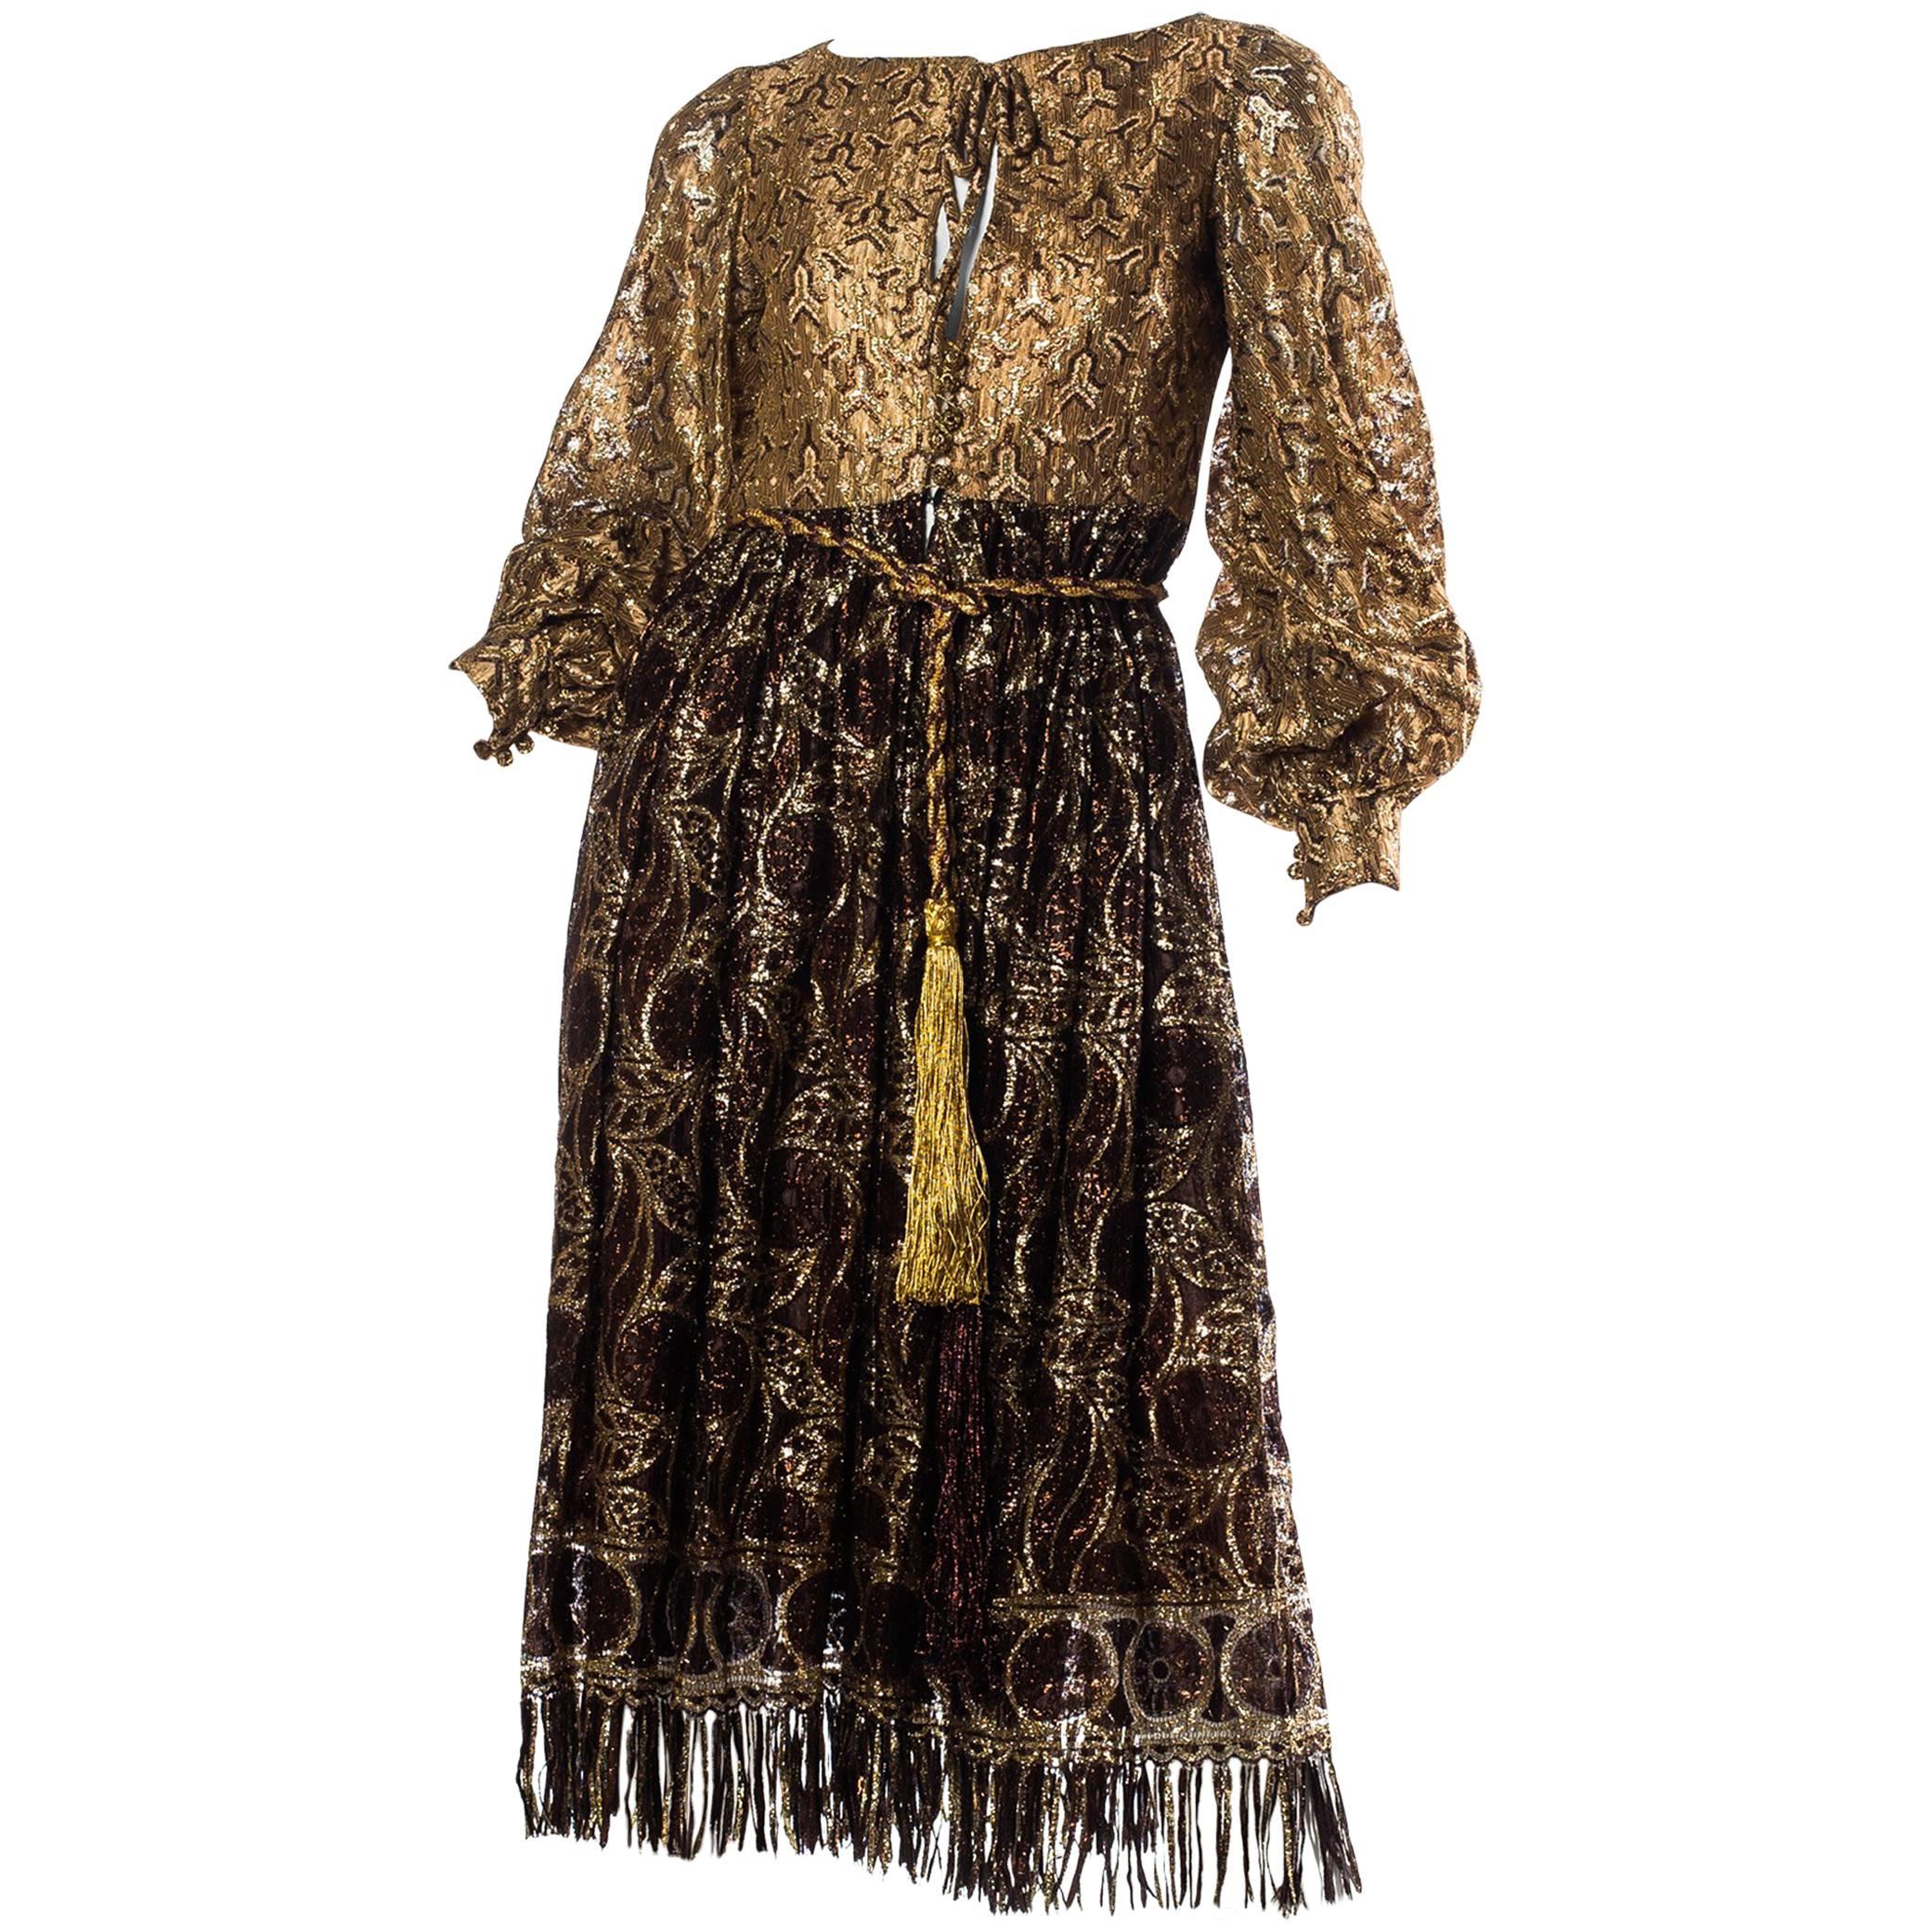 1960s Metallic Lace Dress with Fringe and Crystals